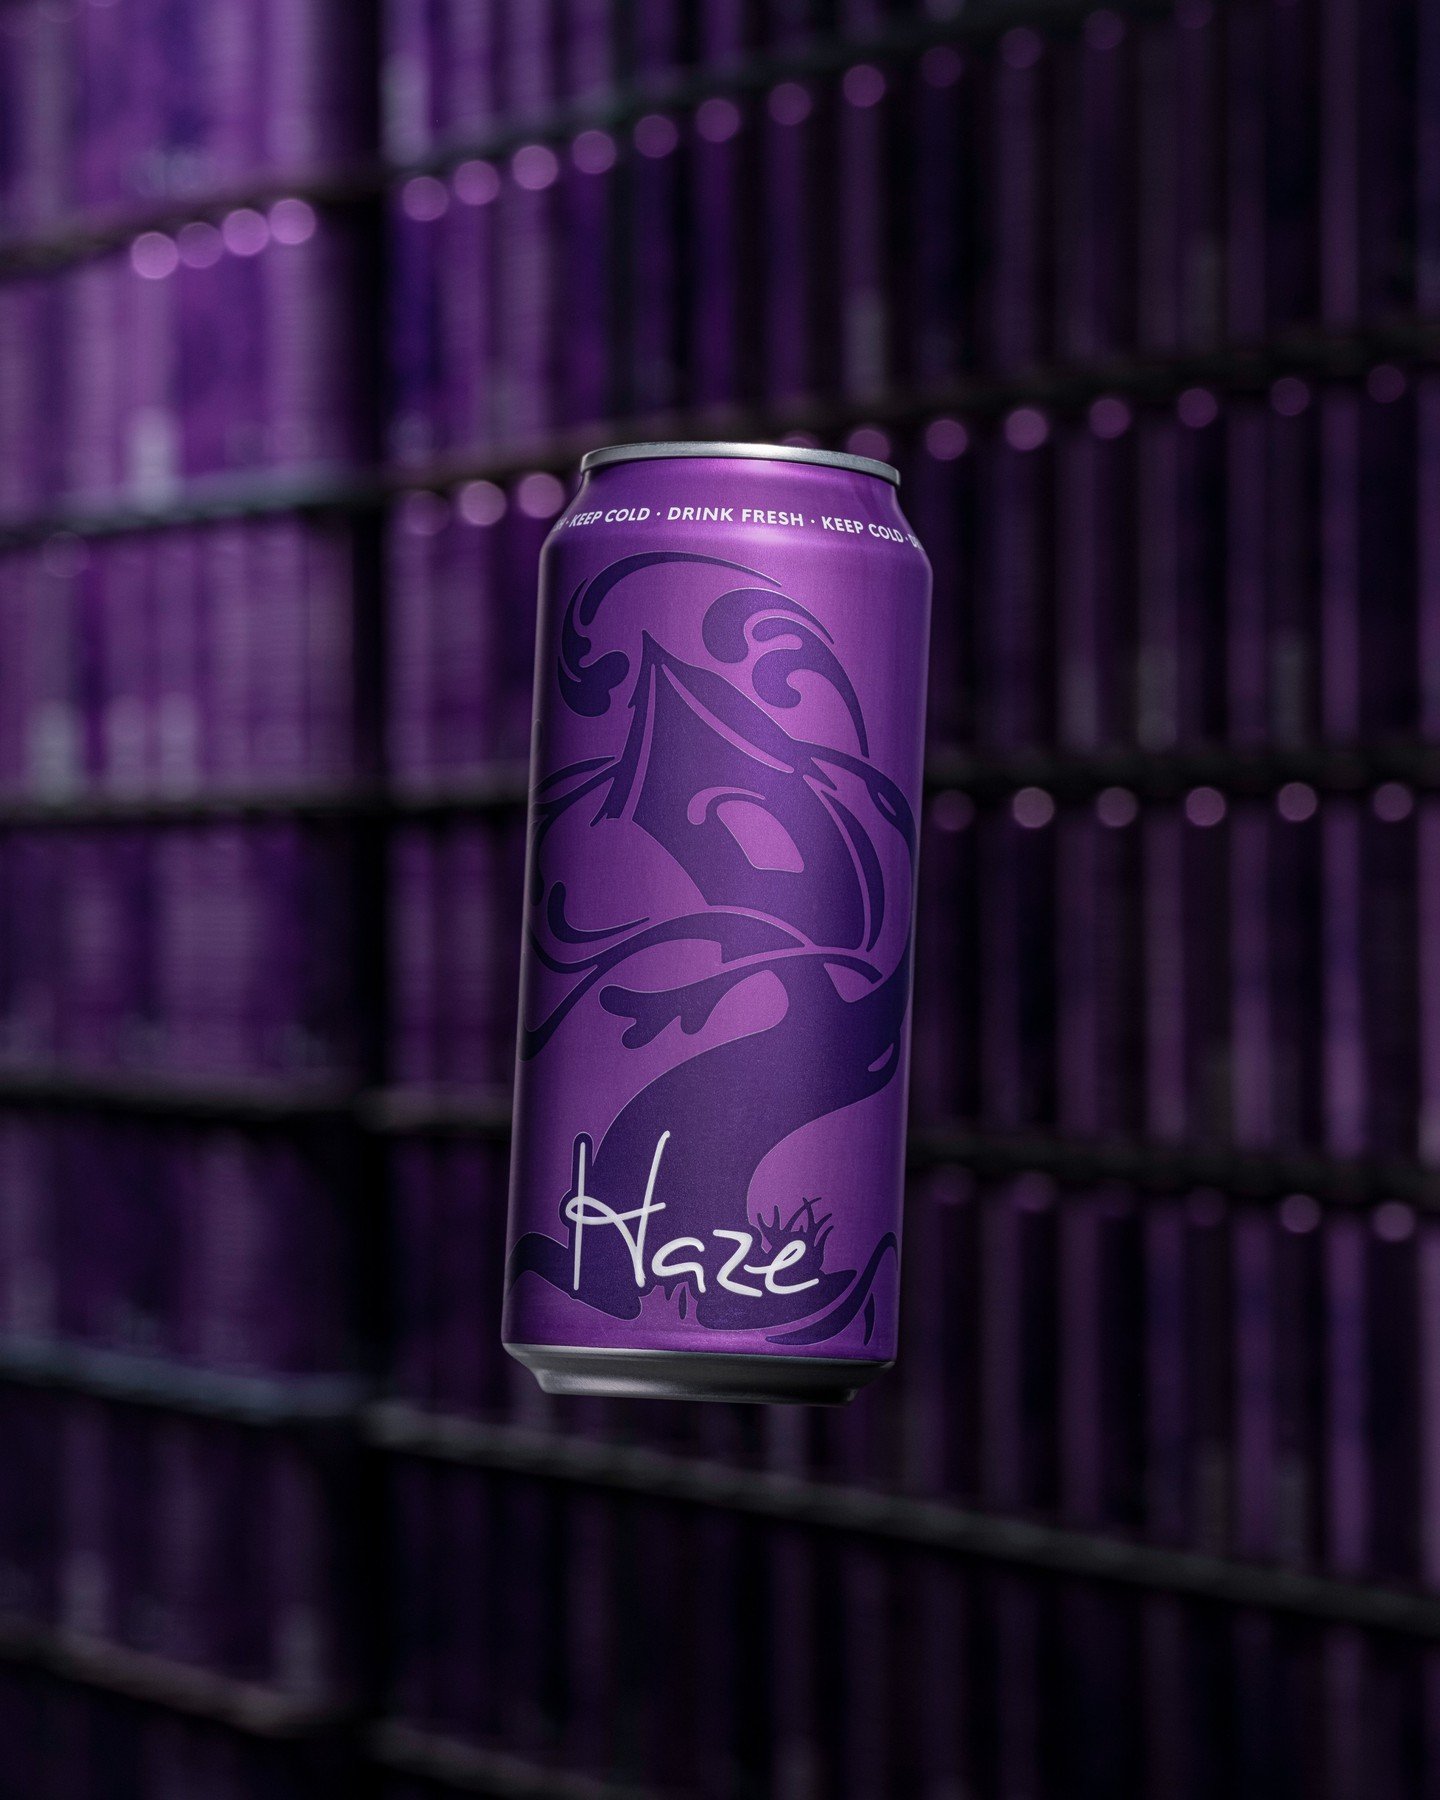 We're running more Haze today to ensure we remain well-stocked through the weekend.

Our peachy flagship Double IPA is tasting incredible, with our newest hop selections now hitting their stride. 

A note that 40 cases remain in the ecosystem from th